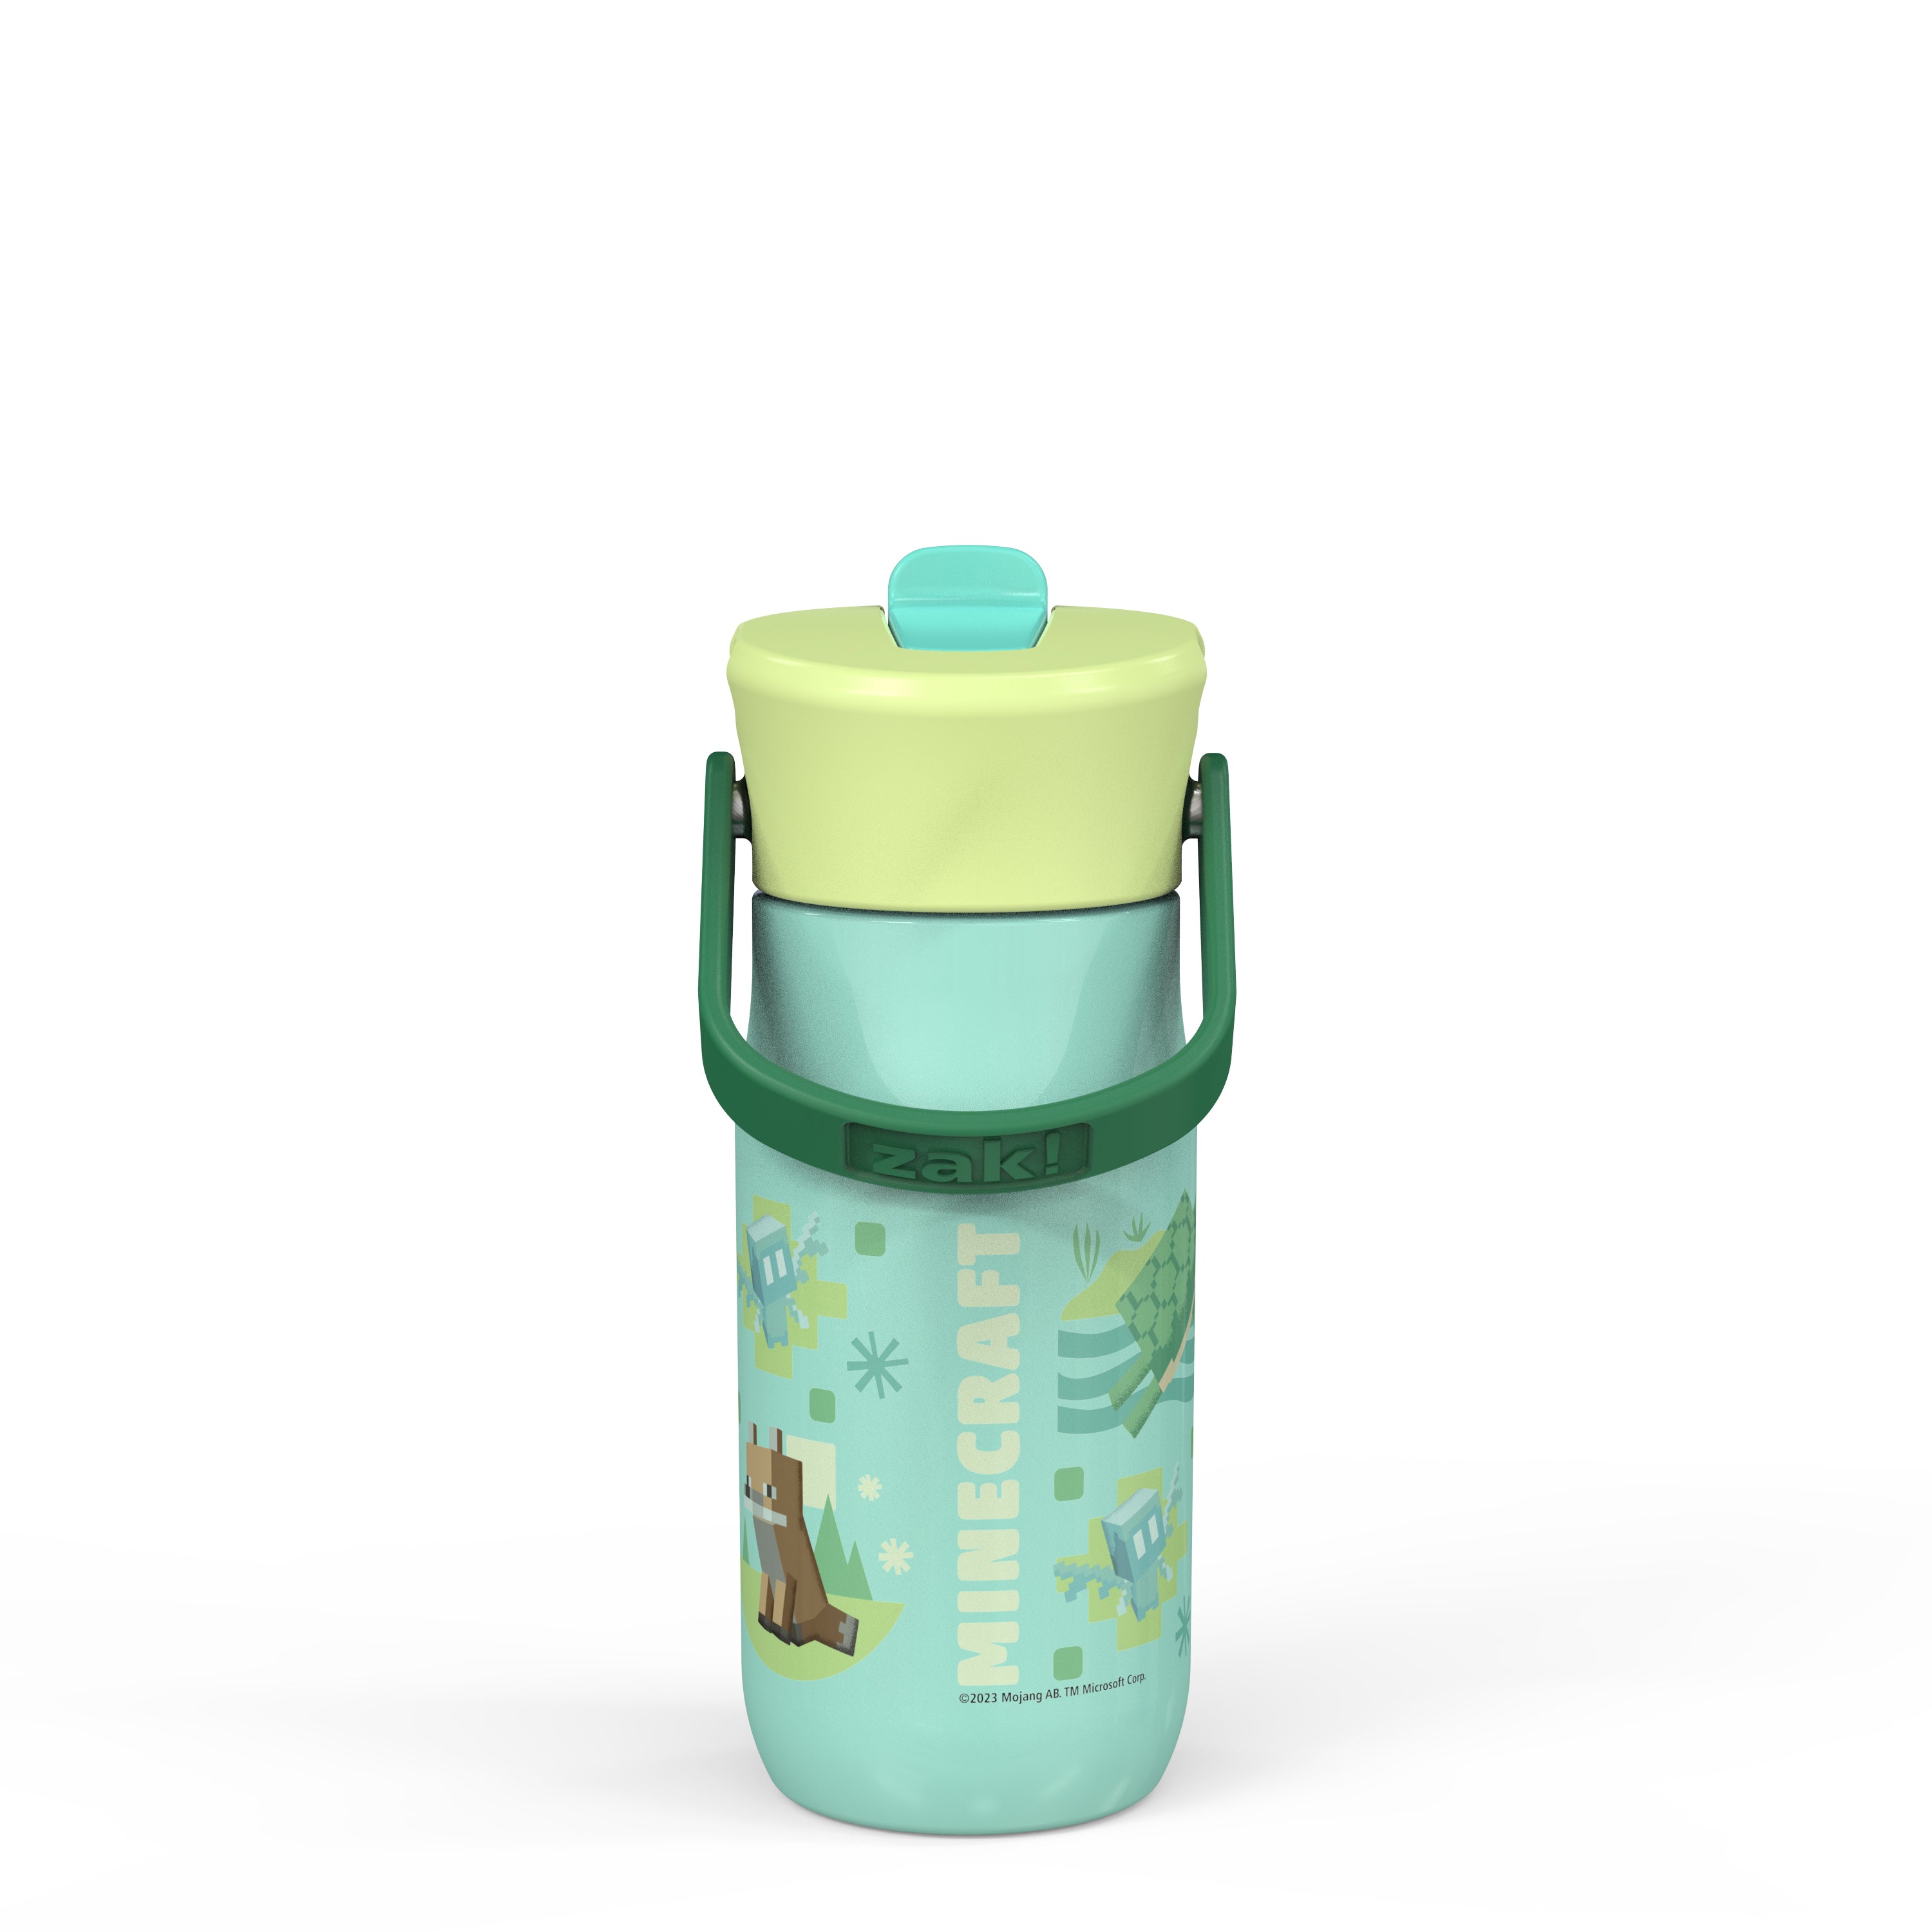 Minecraft Harmony Recycled Stainless Steel Kids Water Bottle with Straw Spout, 14 ounces